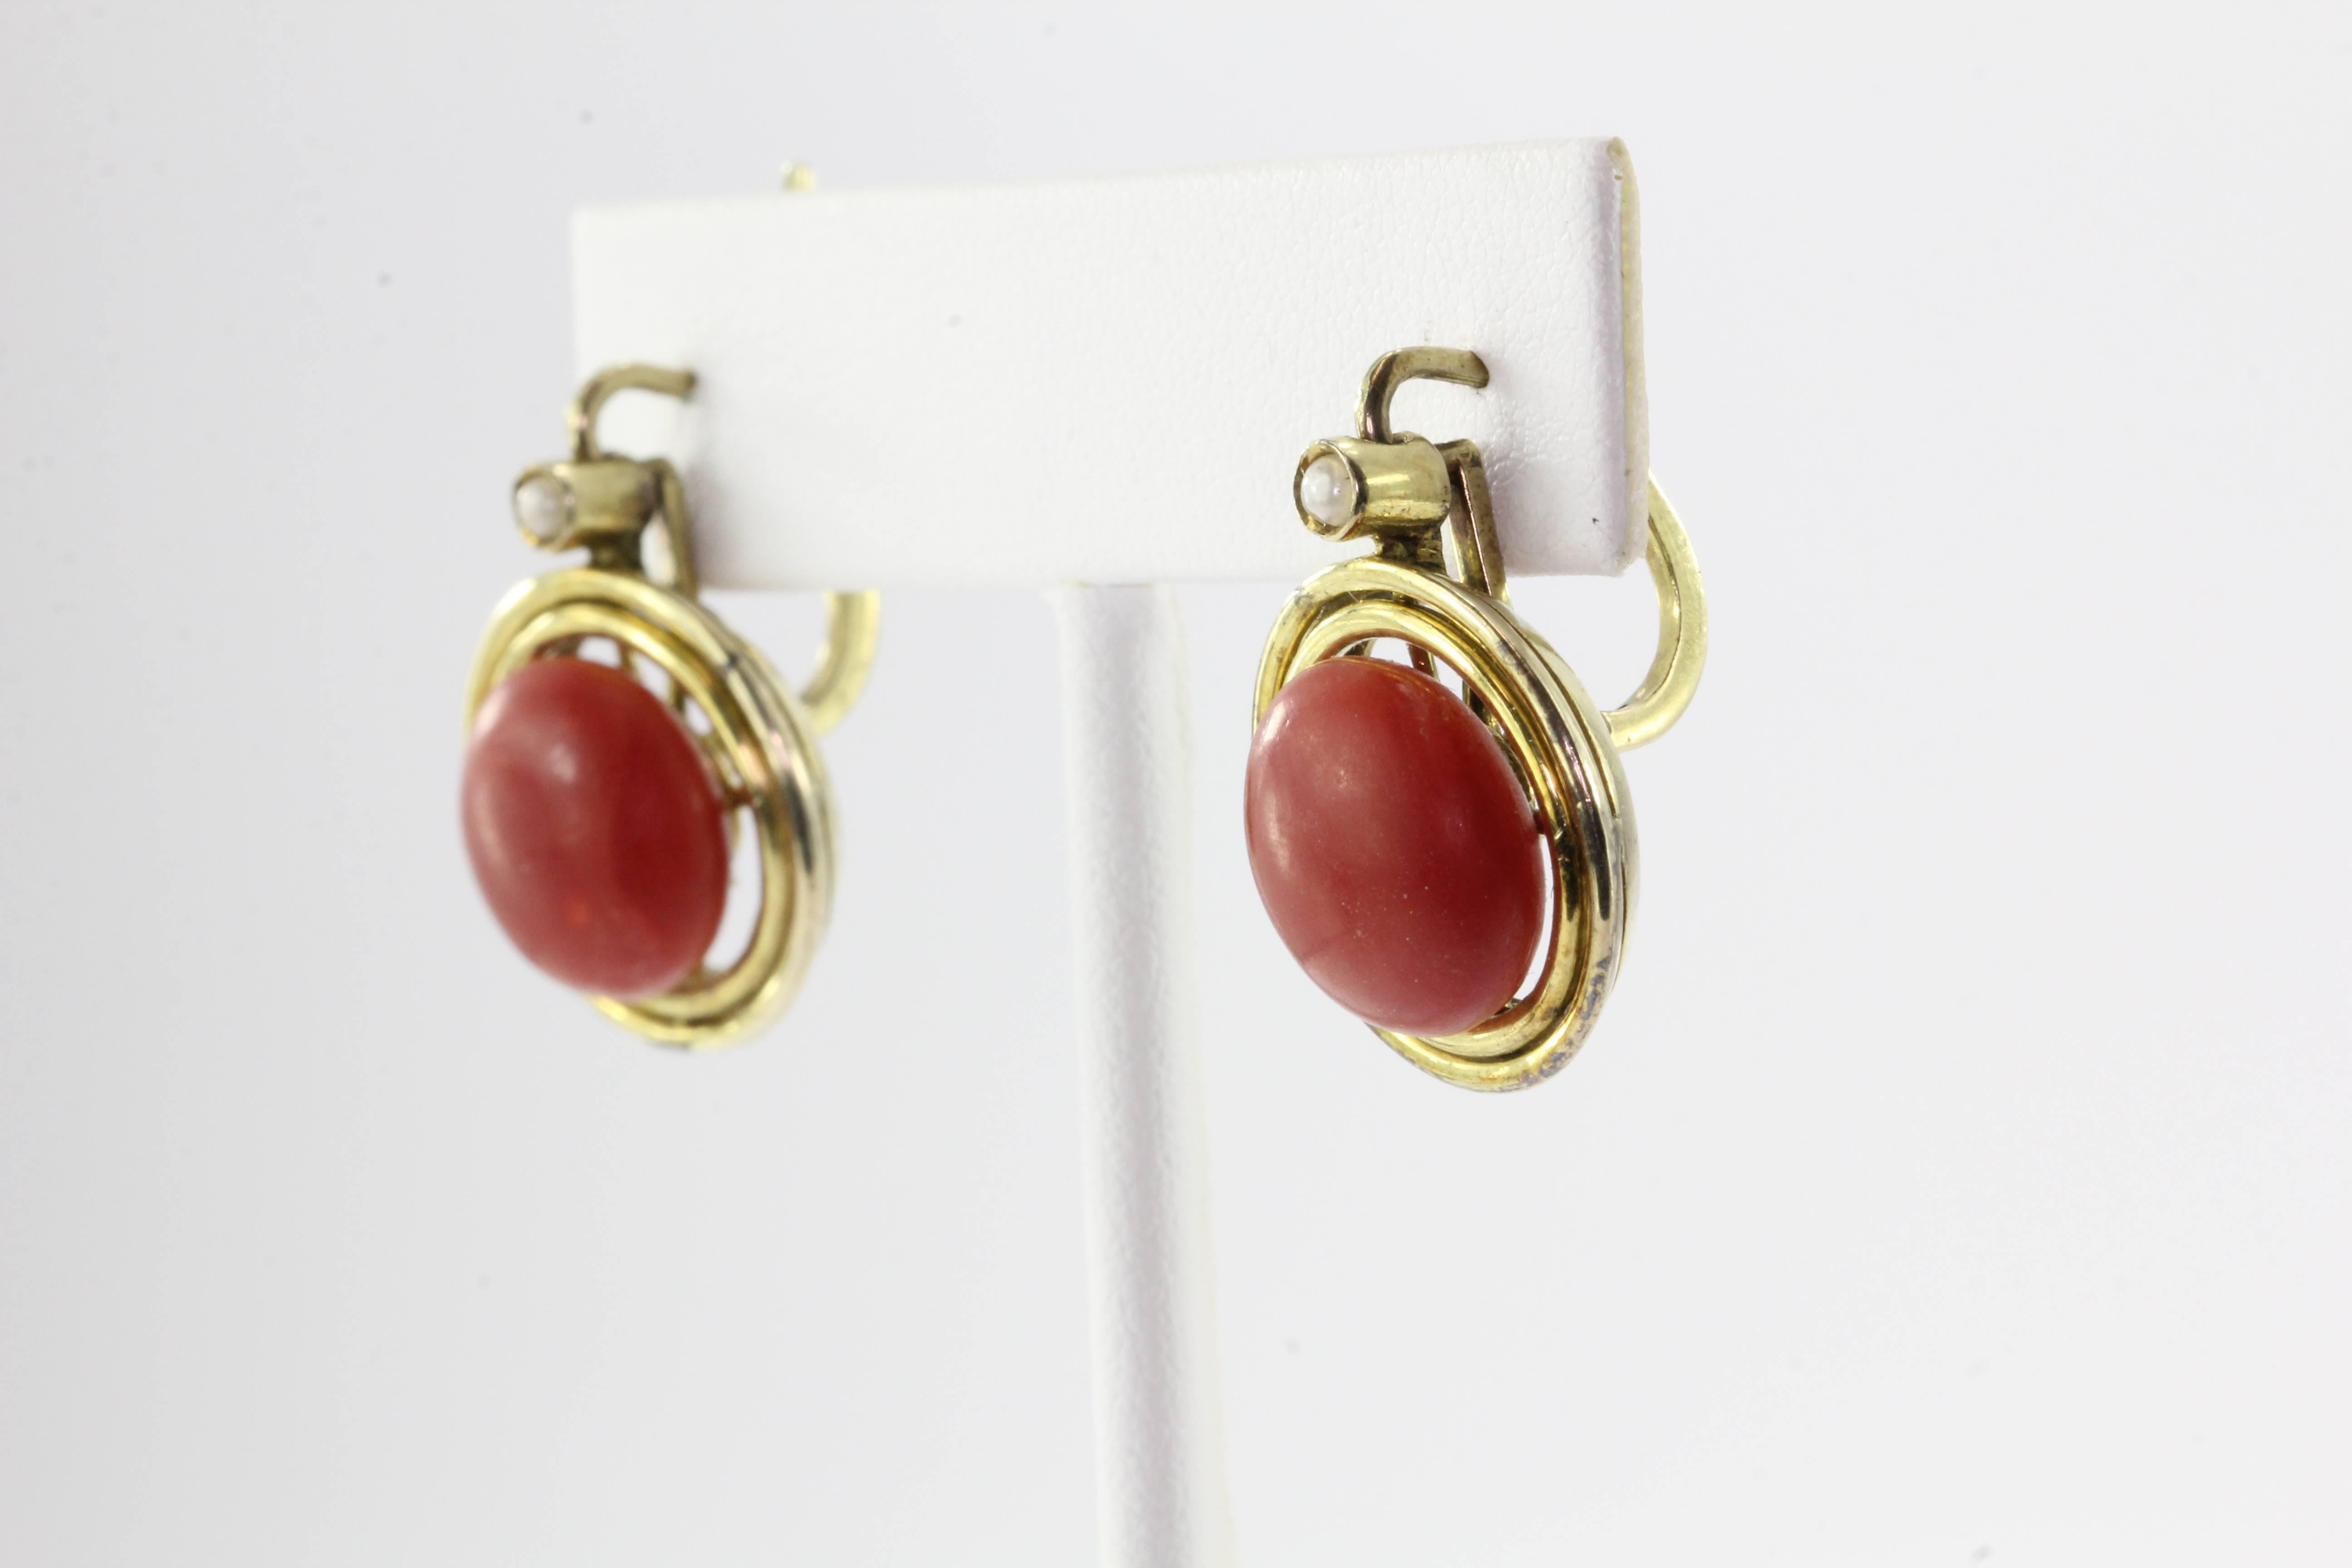 Victorian Red Oxblood Coral Seed Pearl 14K Gold Earrings. The earrings are in excellent estate condition and ready to wear. The piece are made of 14K yellow gold and set with seed pearls and oxblood red coral. The coral measures about 12.5mm in